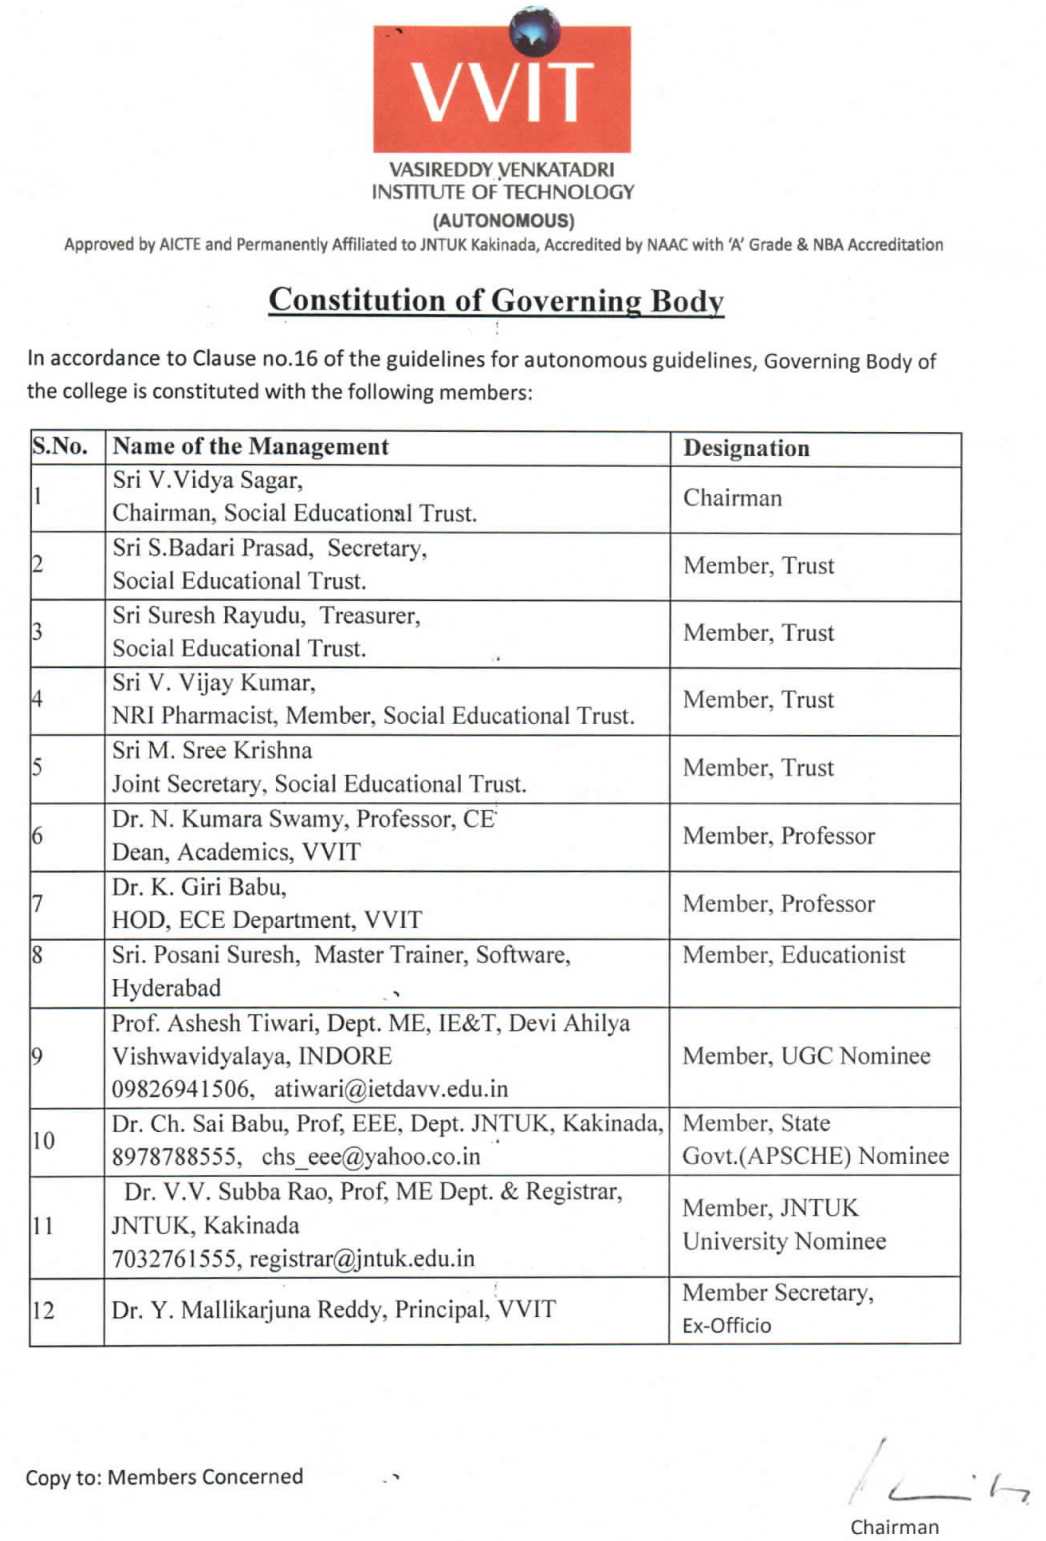 CONSTITUTION OF GOVERNING BODY